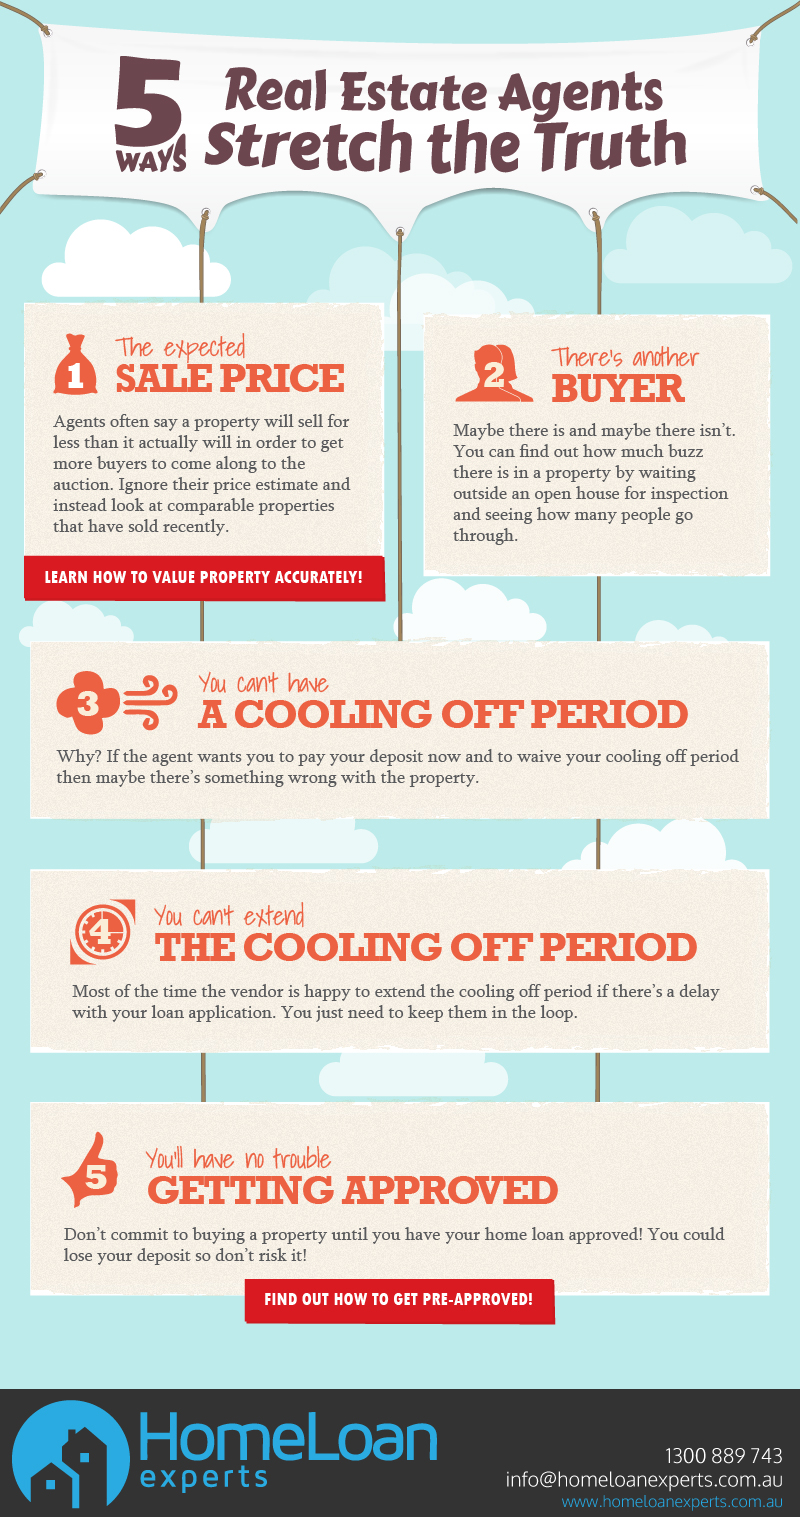 5 Ways Real Estate Agents Stretch The Truth infographic